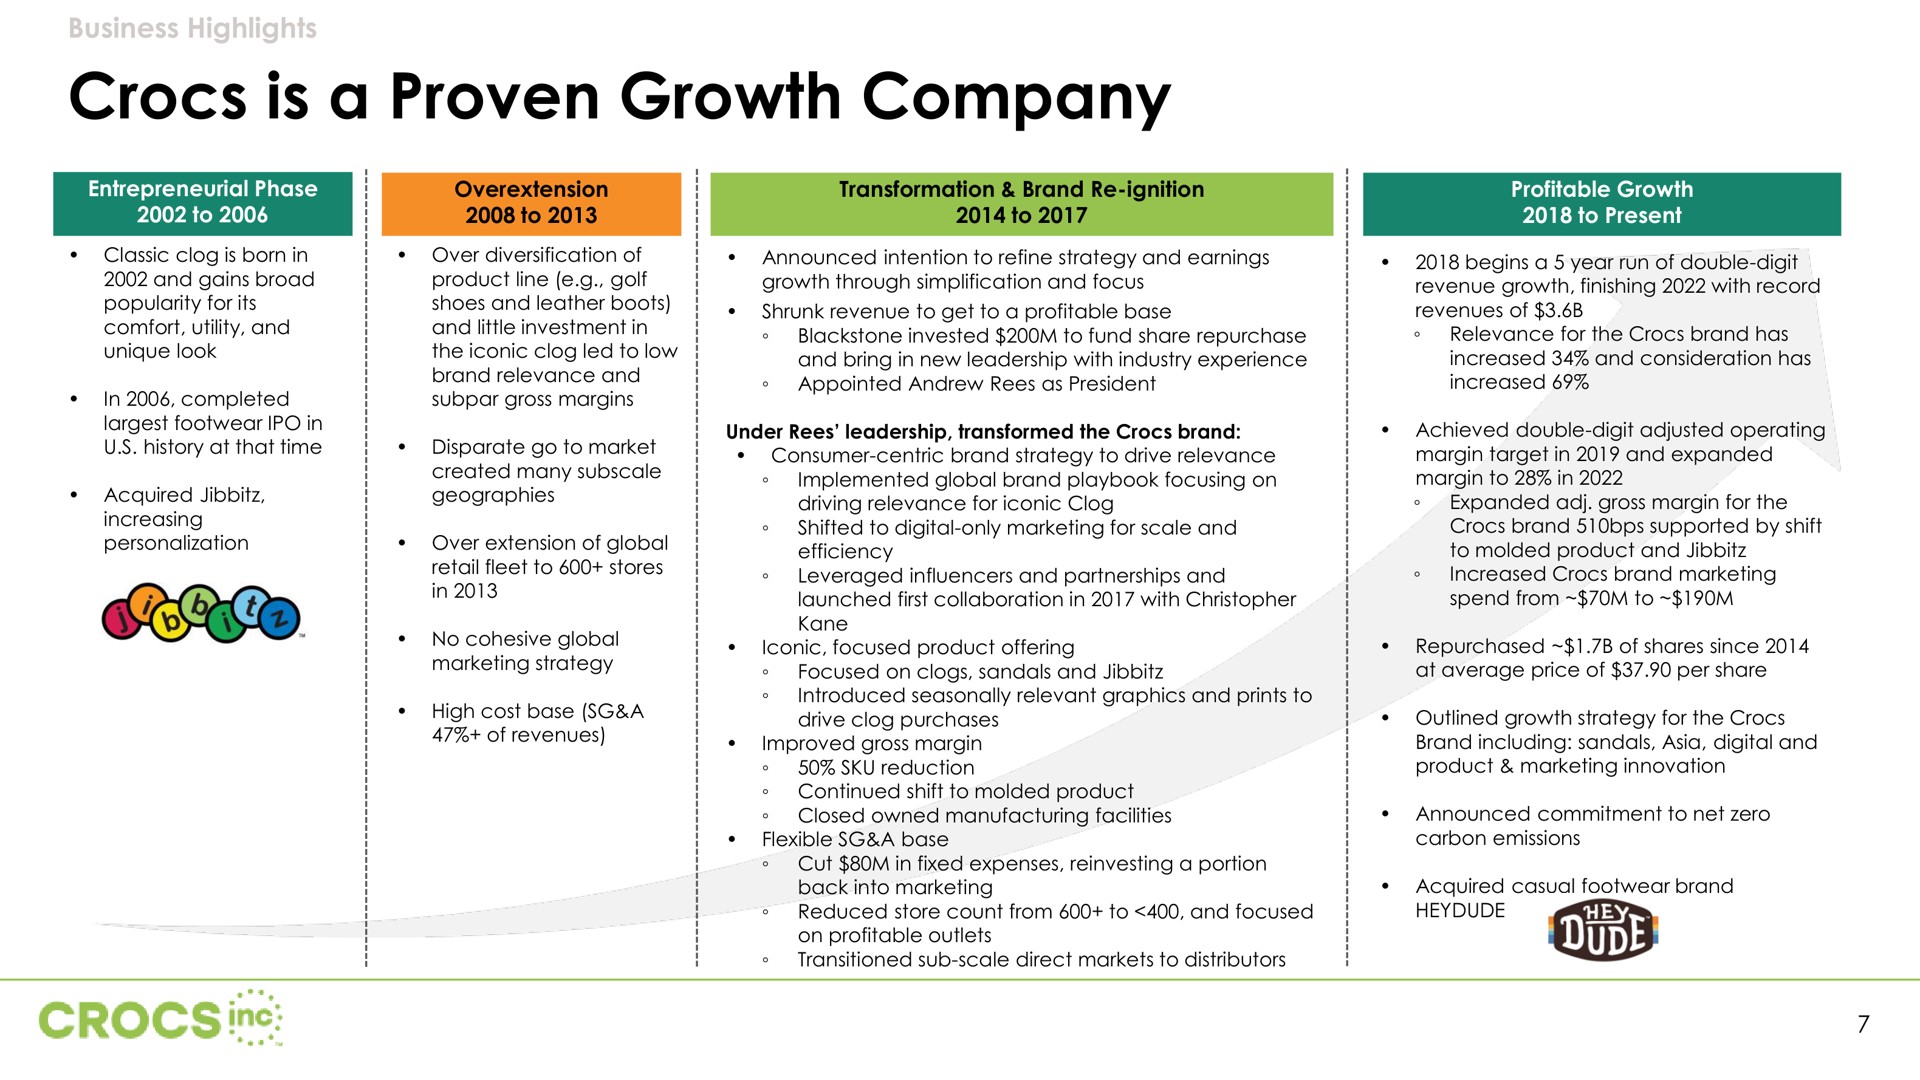 is a proven growth company | Crocs